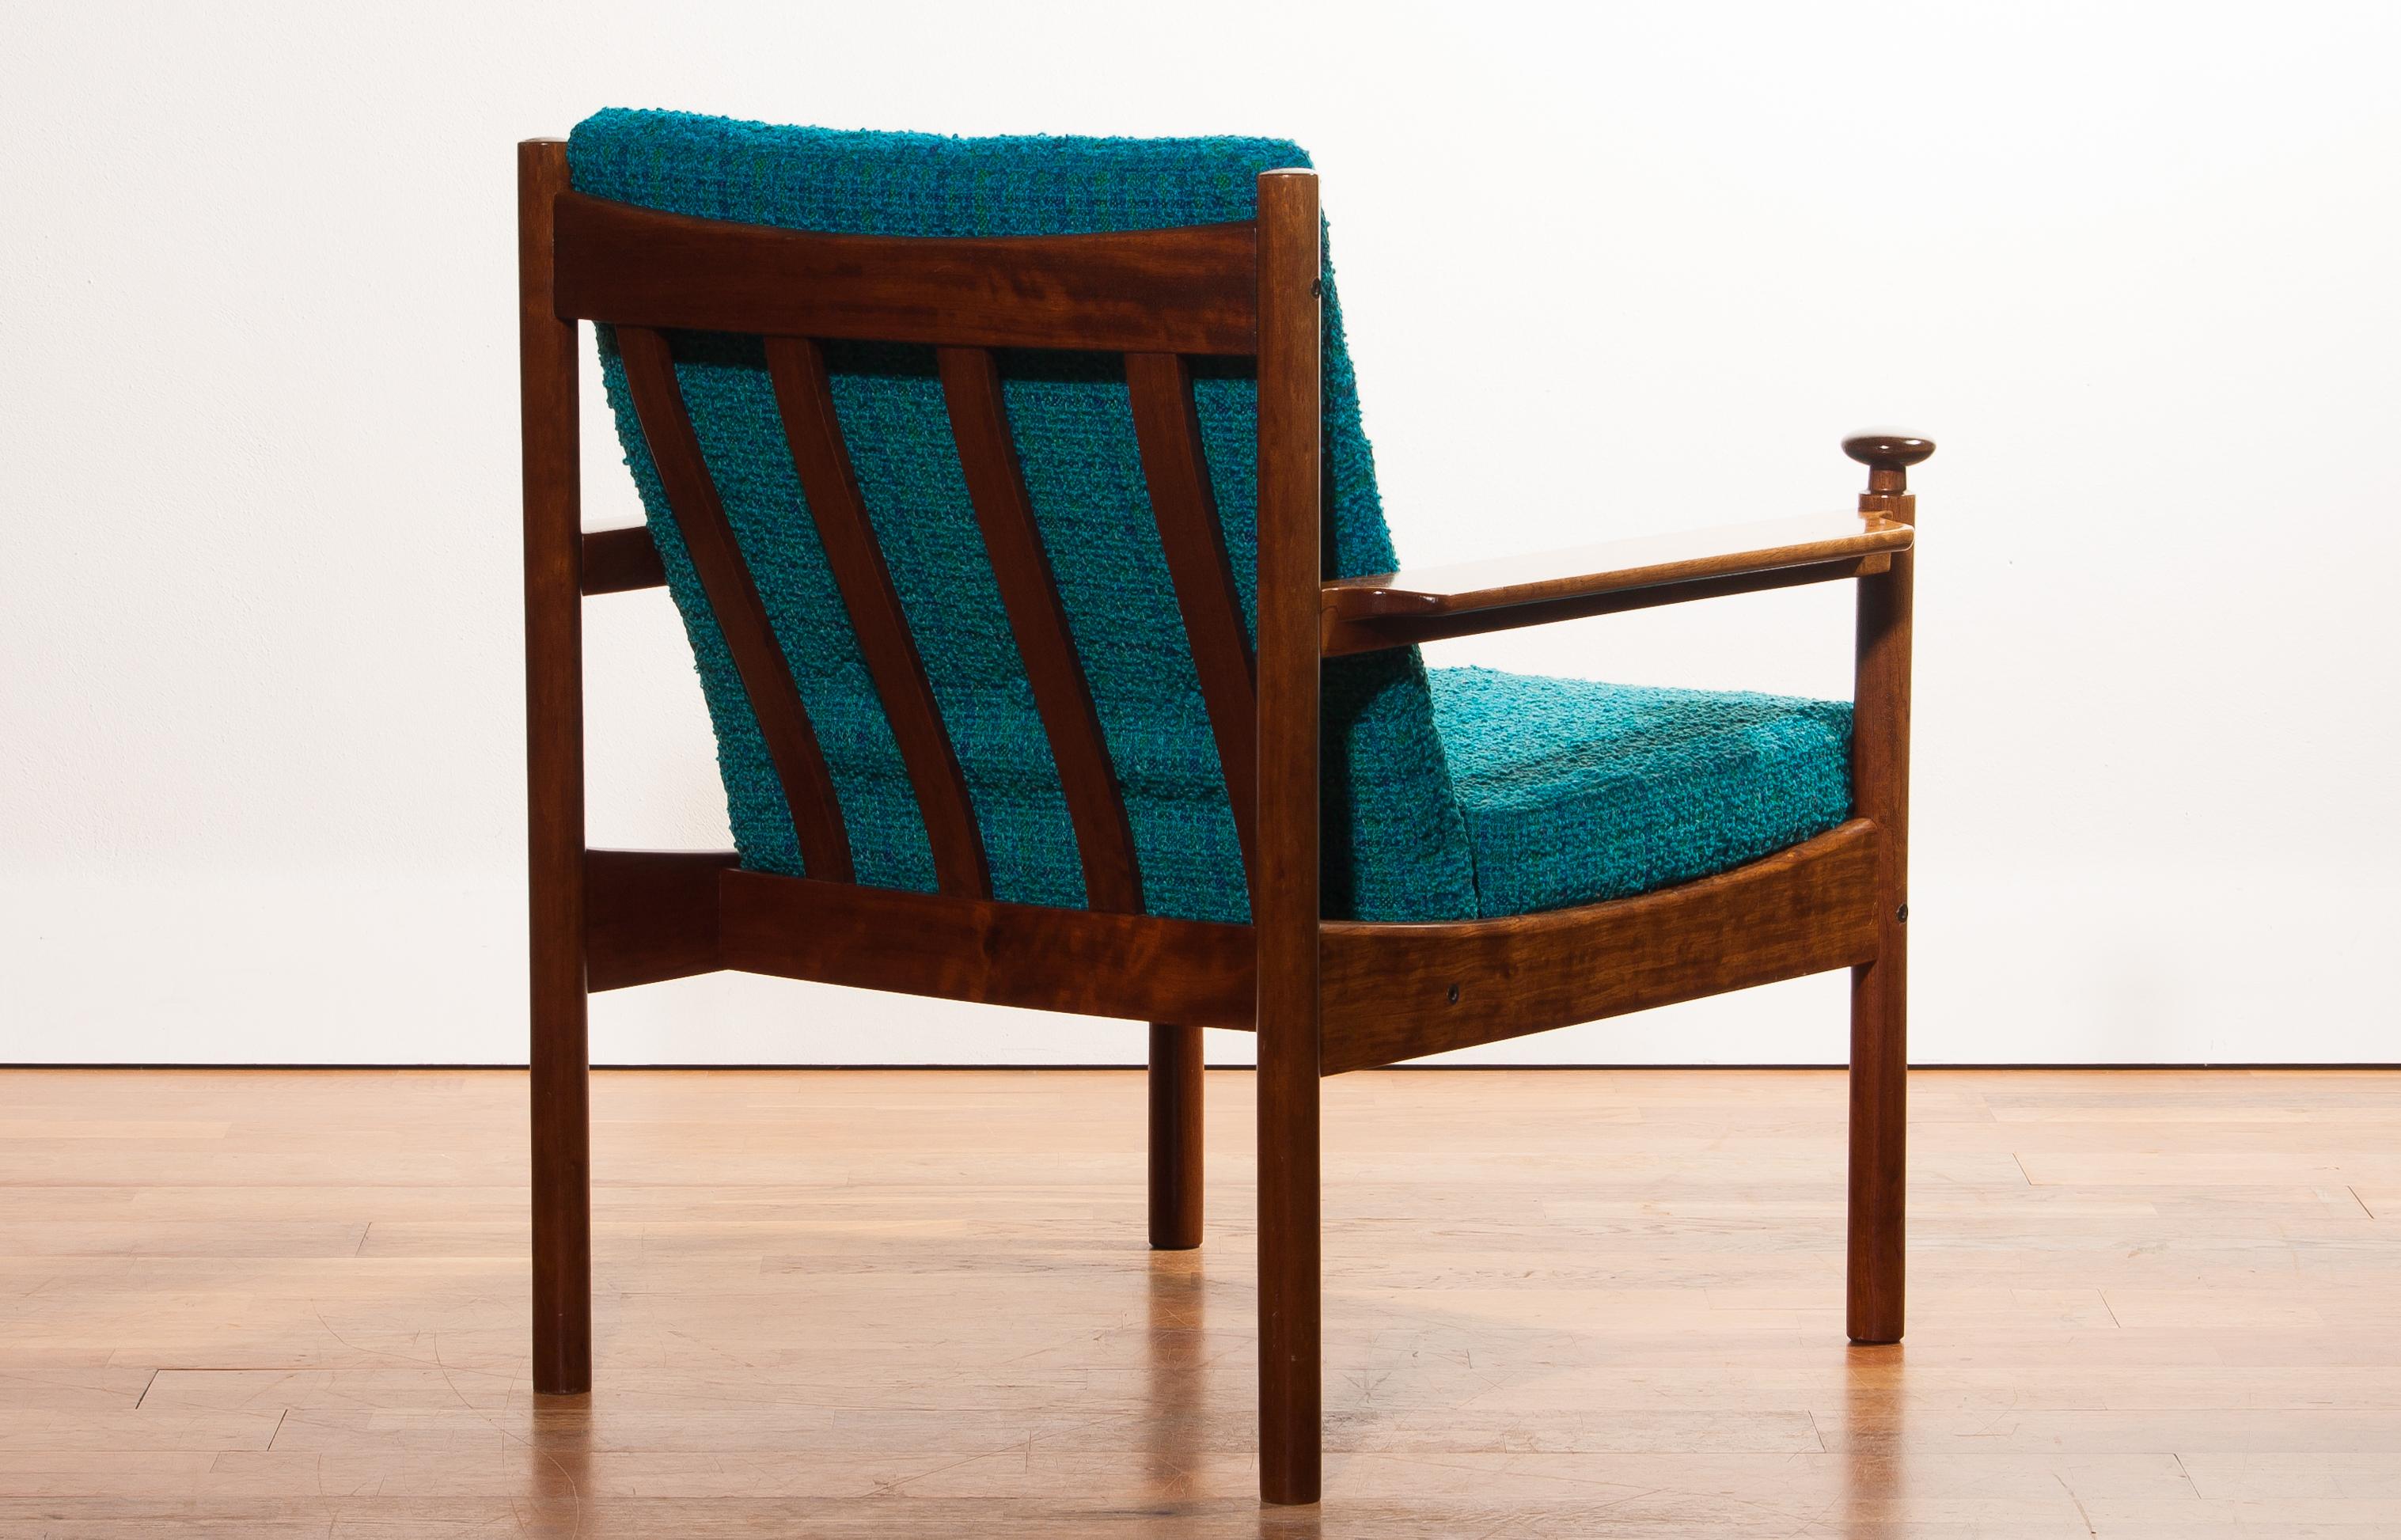 Beautiful chairs designed by Torbjørn Afdal for Sandvik & Co. Mobler, Norway.
The wooden frame with the blue fabric cushions makes it a very nice combination.
The condition, wear consistent with age and use.
Period 1950s
Dimensions: H 83 cm, W